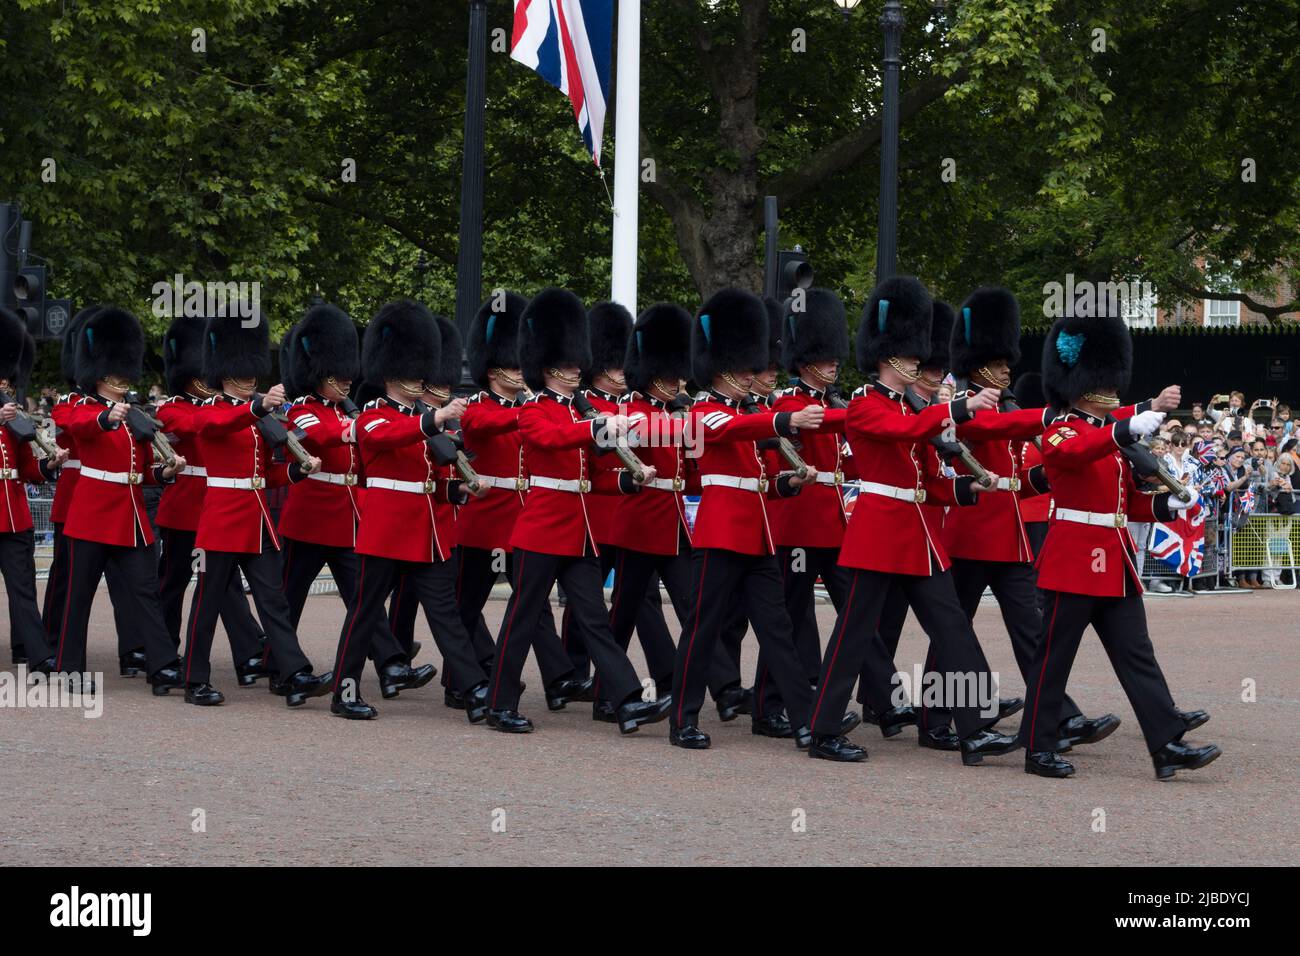 Guards Marching The Queen's Platinum Jubilee Trooping The Colour Color The Mall London Stock Photo